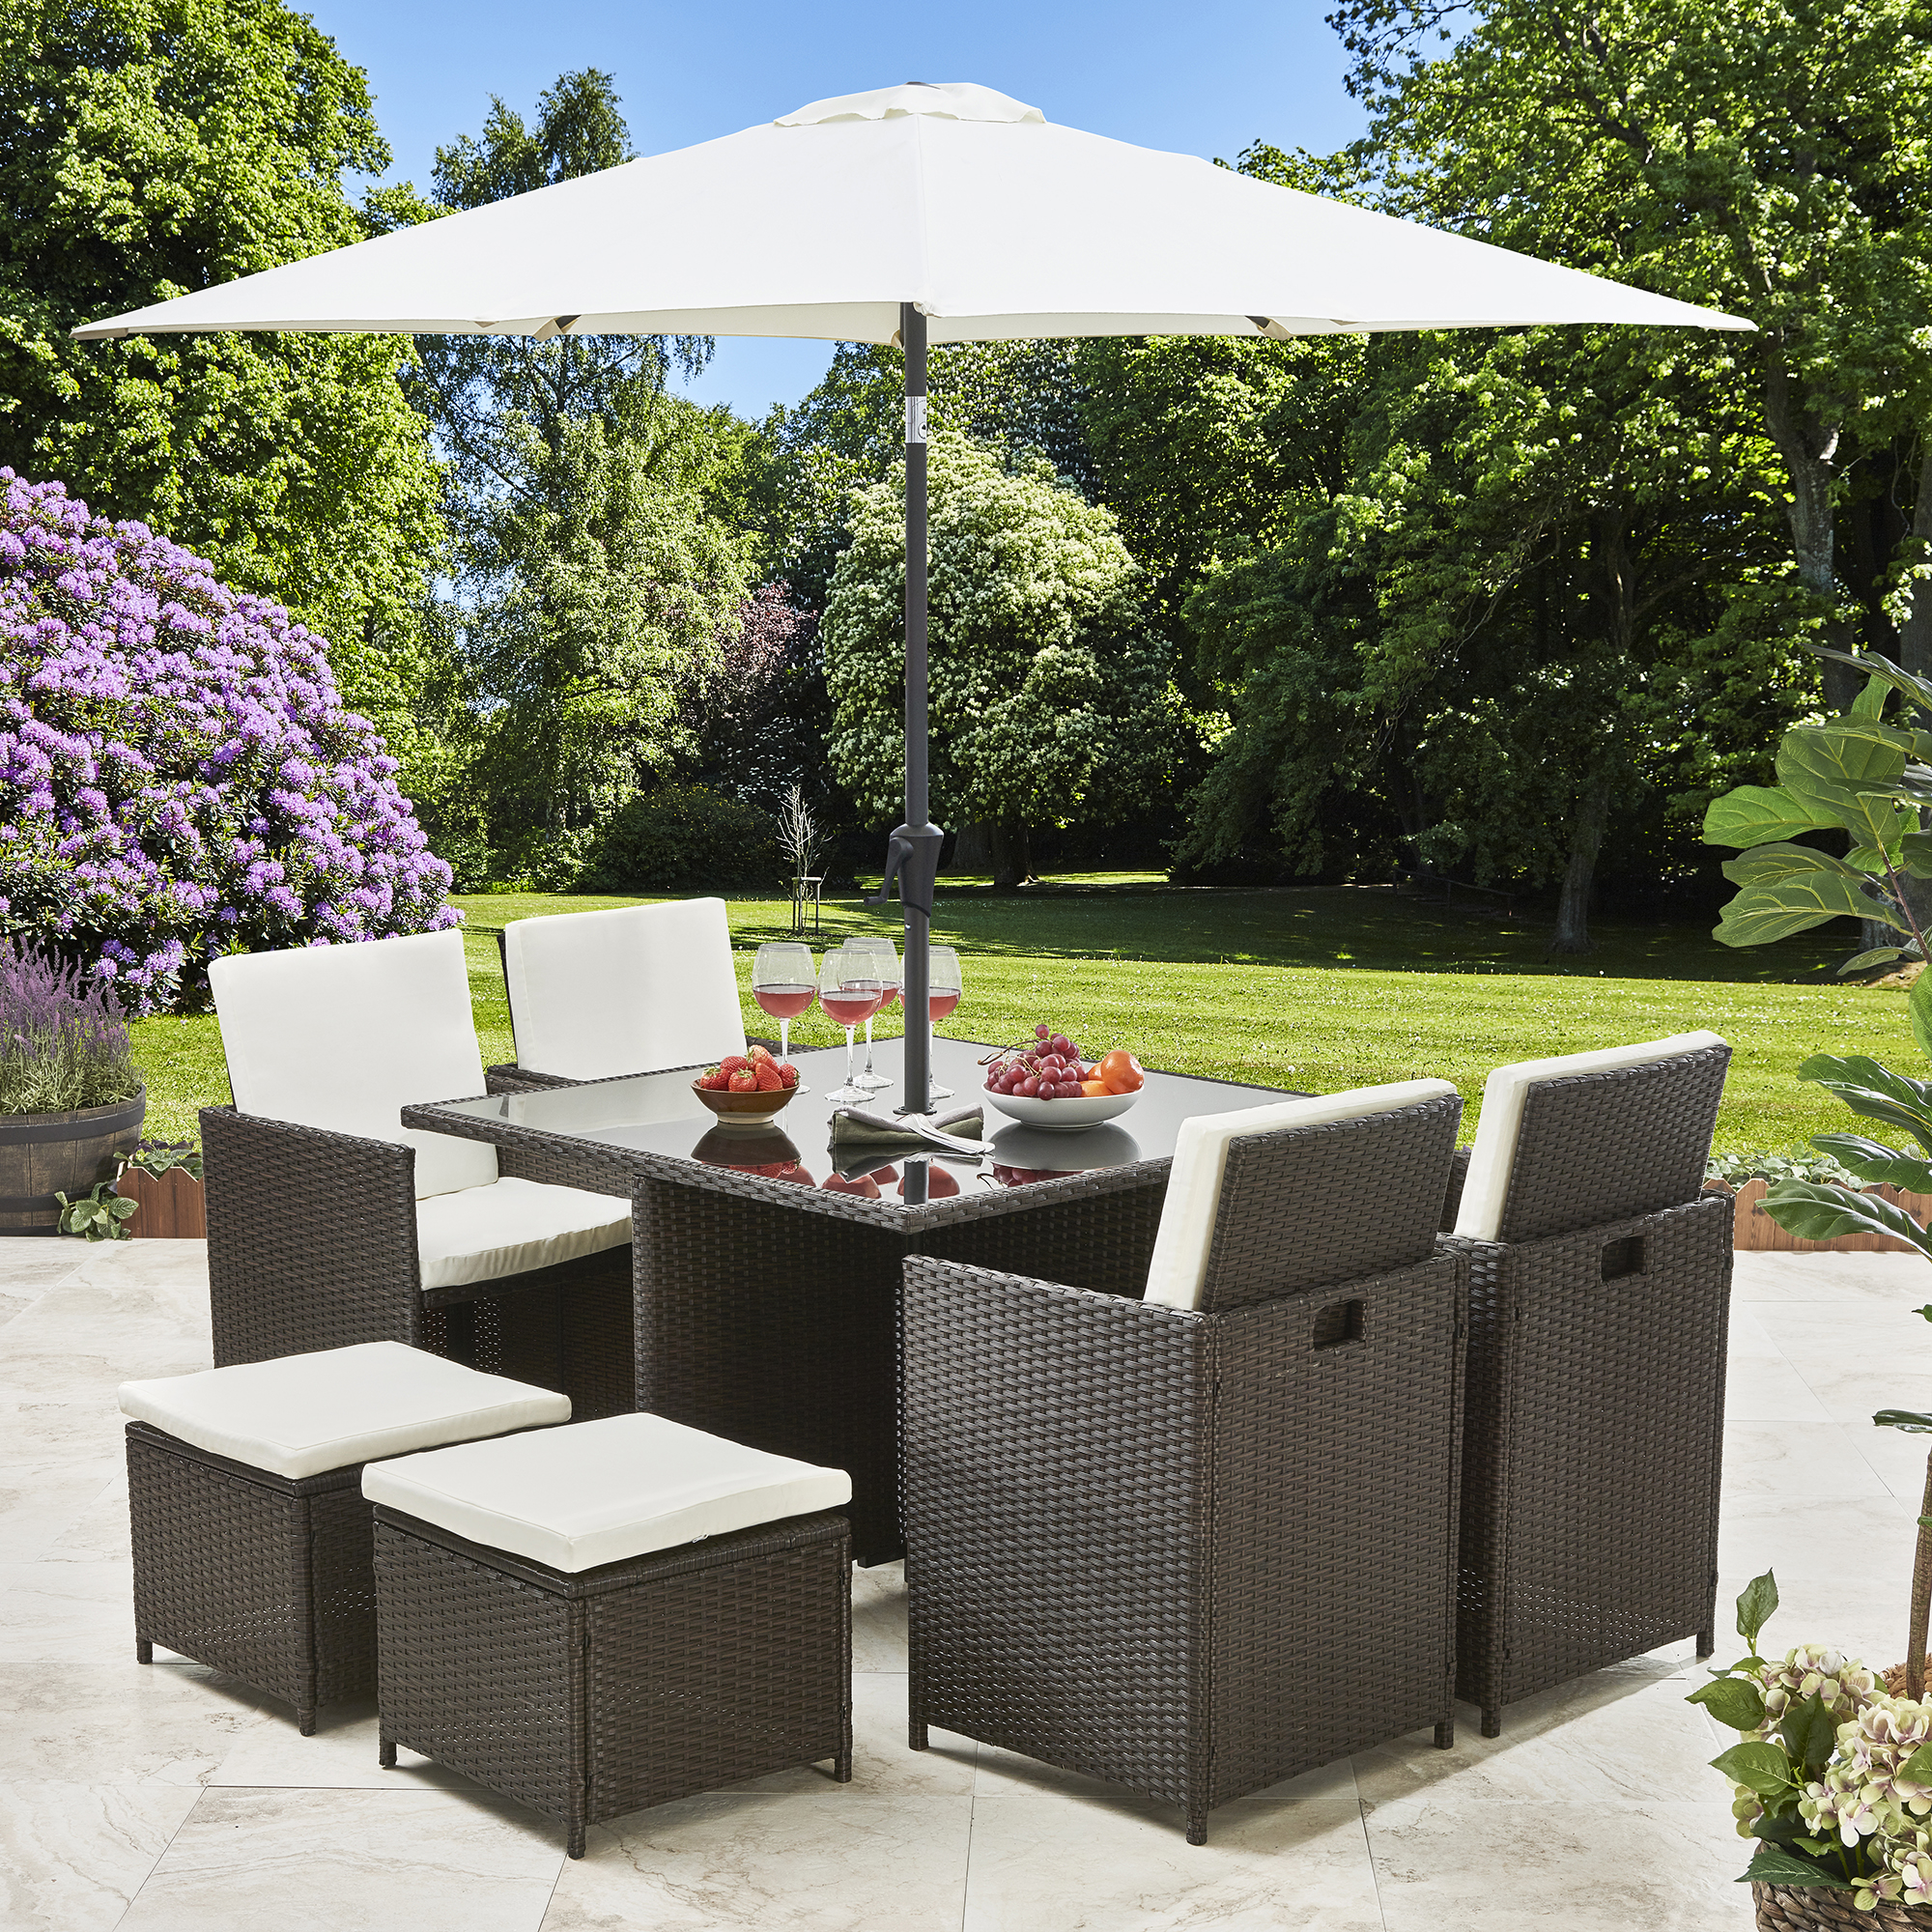 Details About Rattan Cube Dining Table Garden Furniture Patio Set Grey Brown Black for size 2000 X 2000